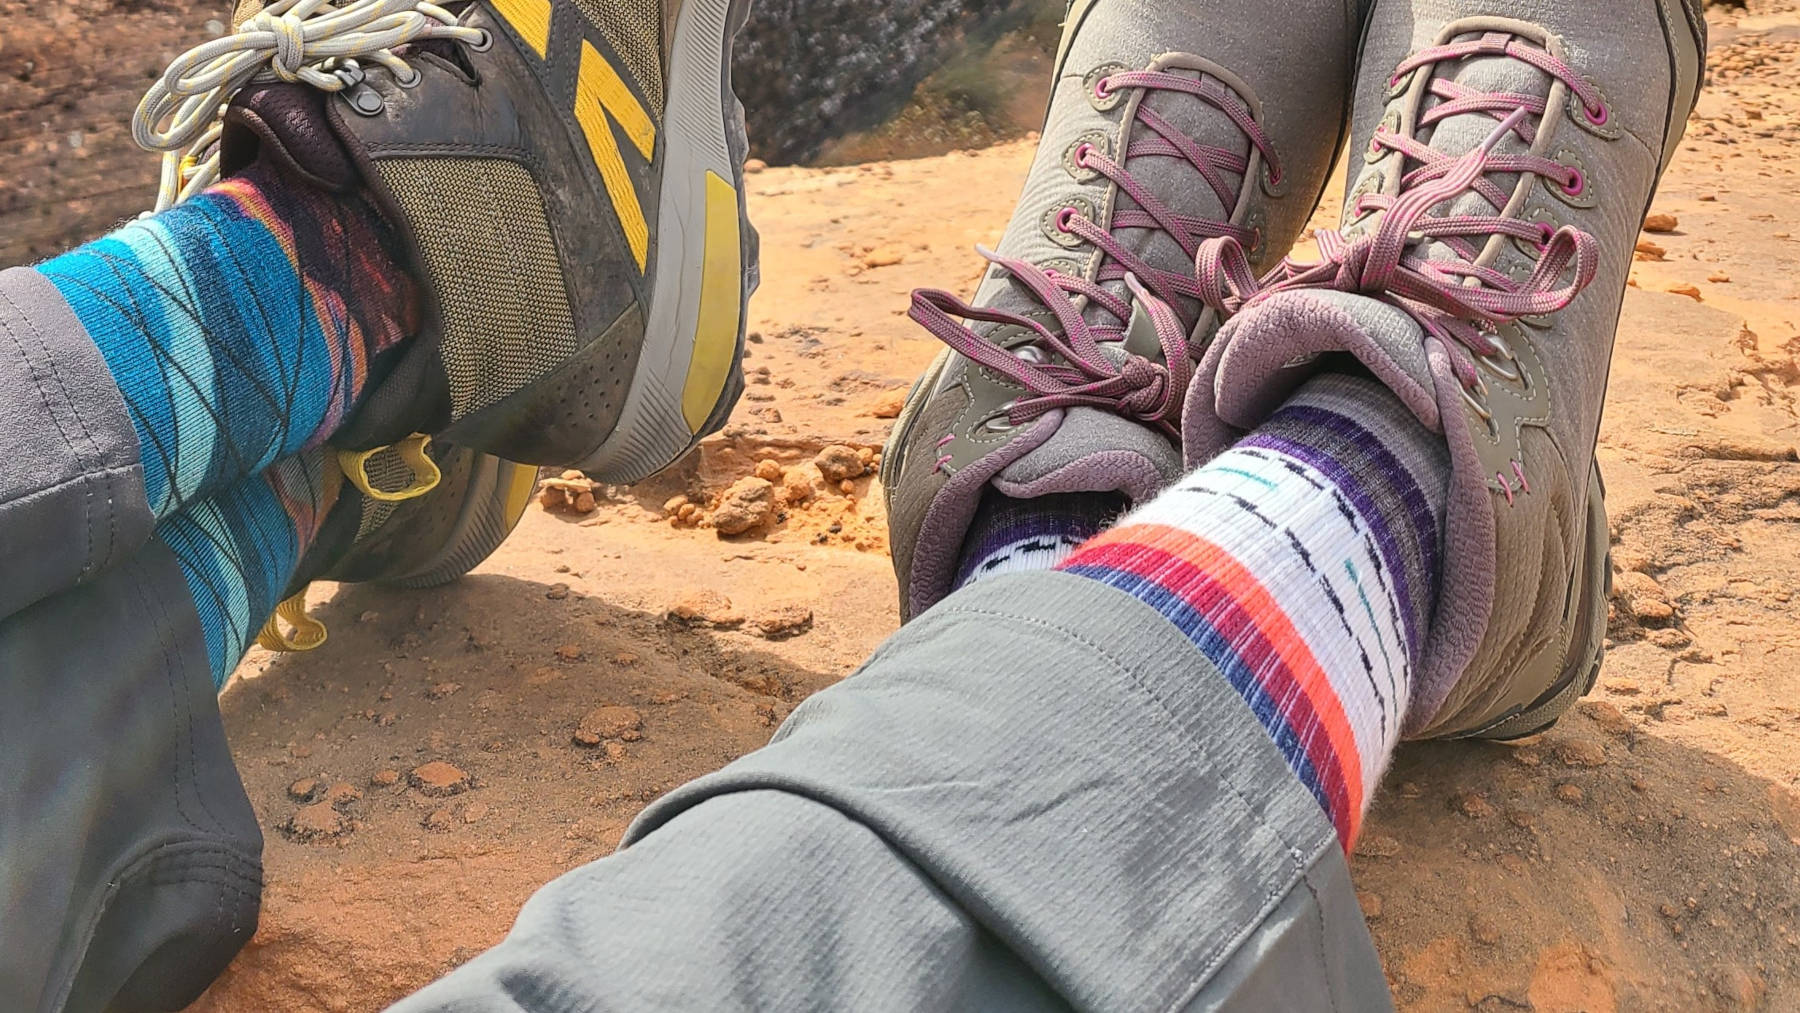 Our colorful hiking socks in Southwest Utah - HelloTrail